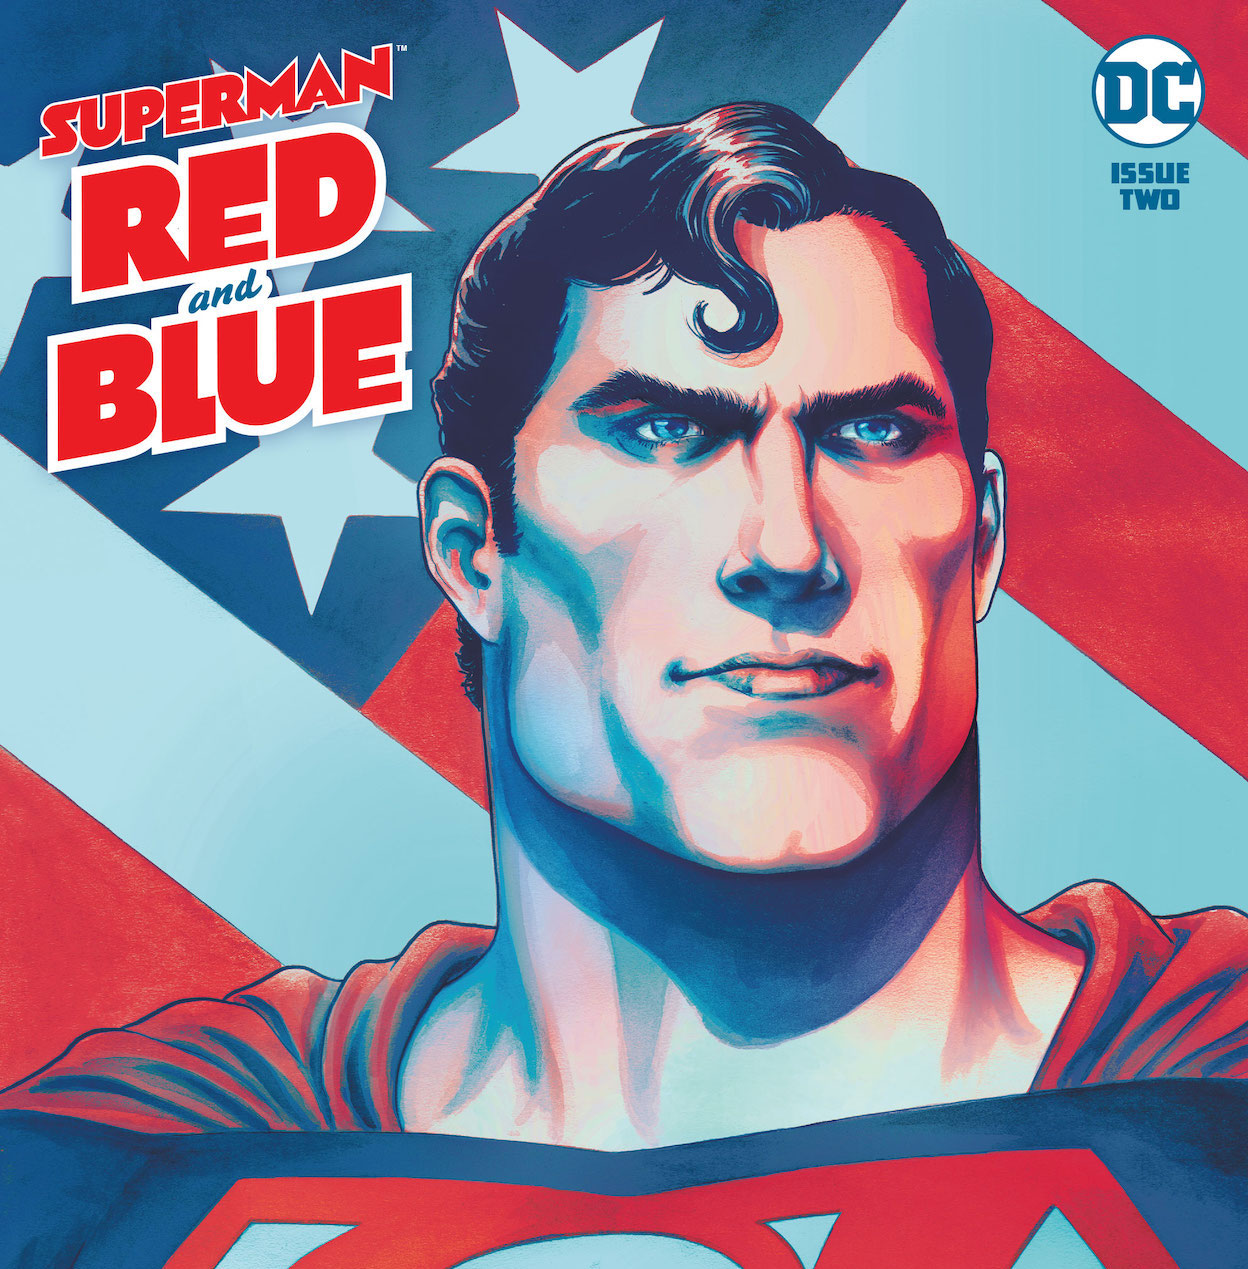 'Superman Red and Blue' #2 offers an eclectic mix of stories